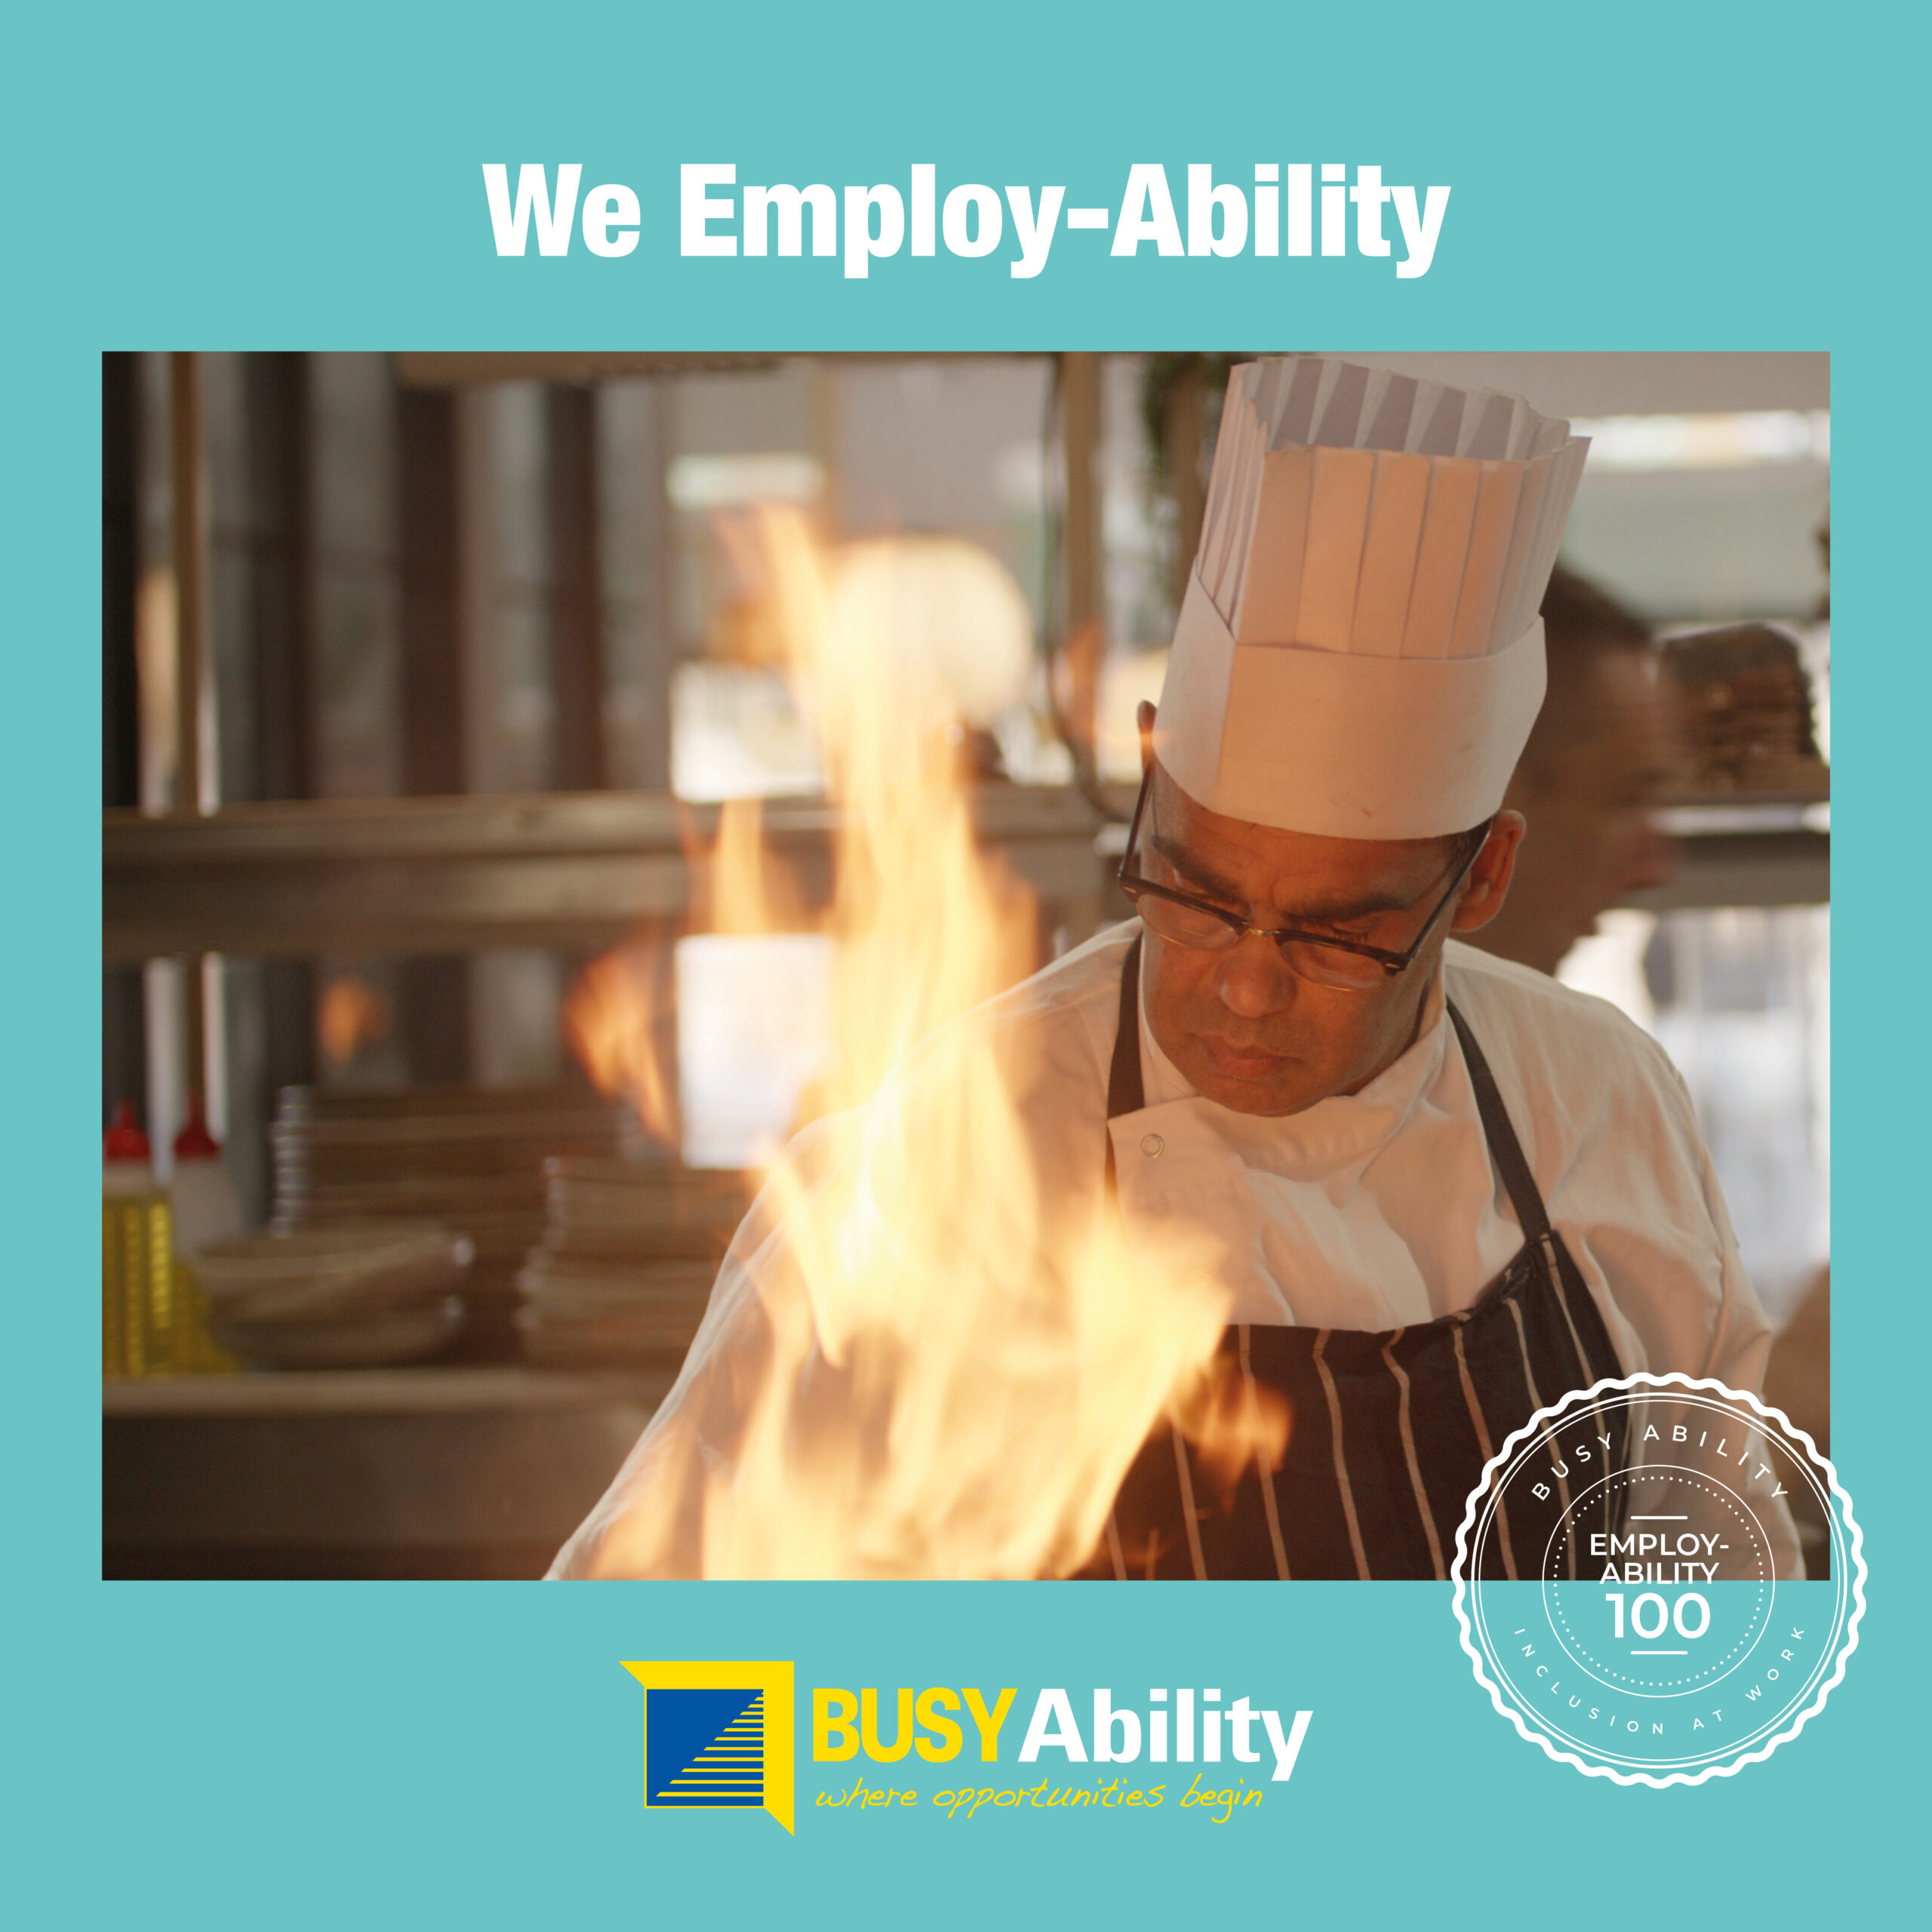 Chef cooking with flames behind "We Employ-Ability' text